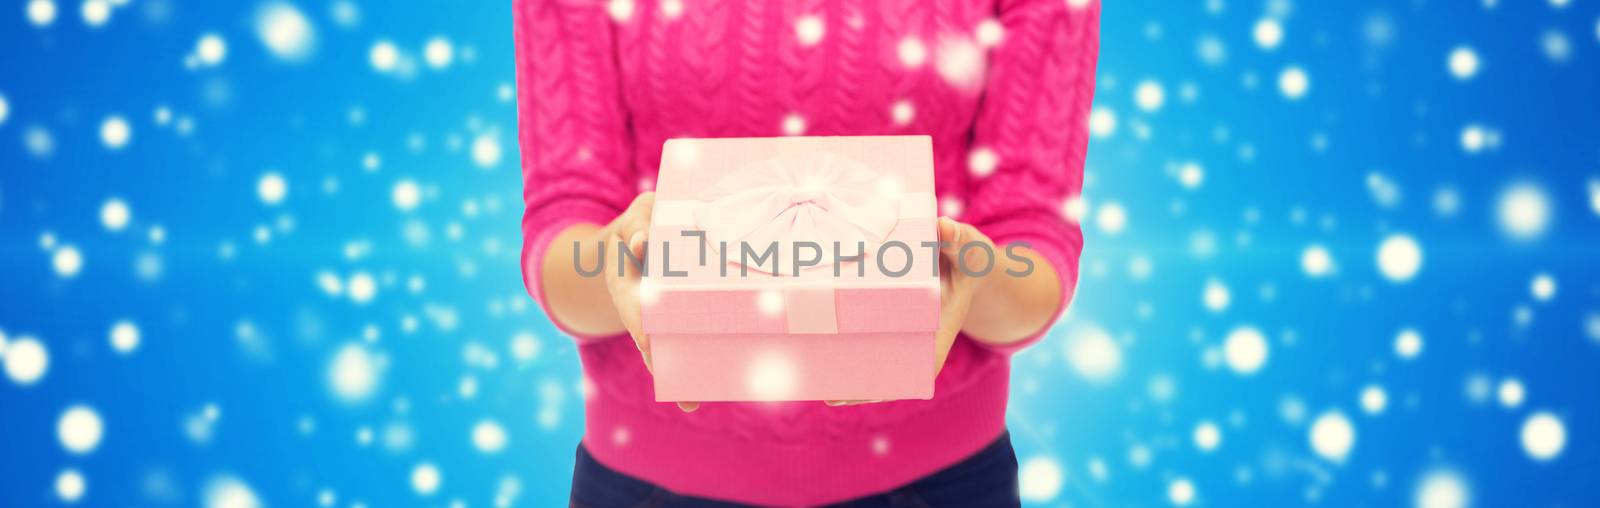 christmas, holidays and people concept - close up of woman in pink sweater holding gift box blue snowy background